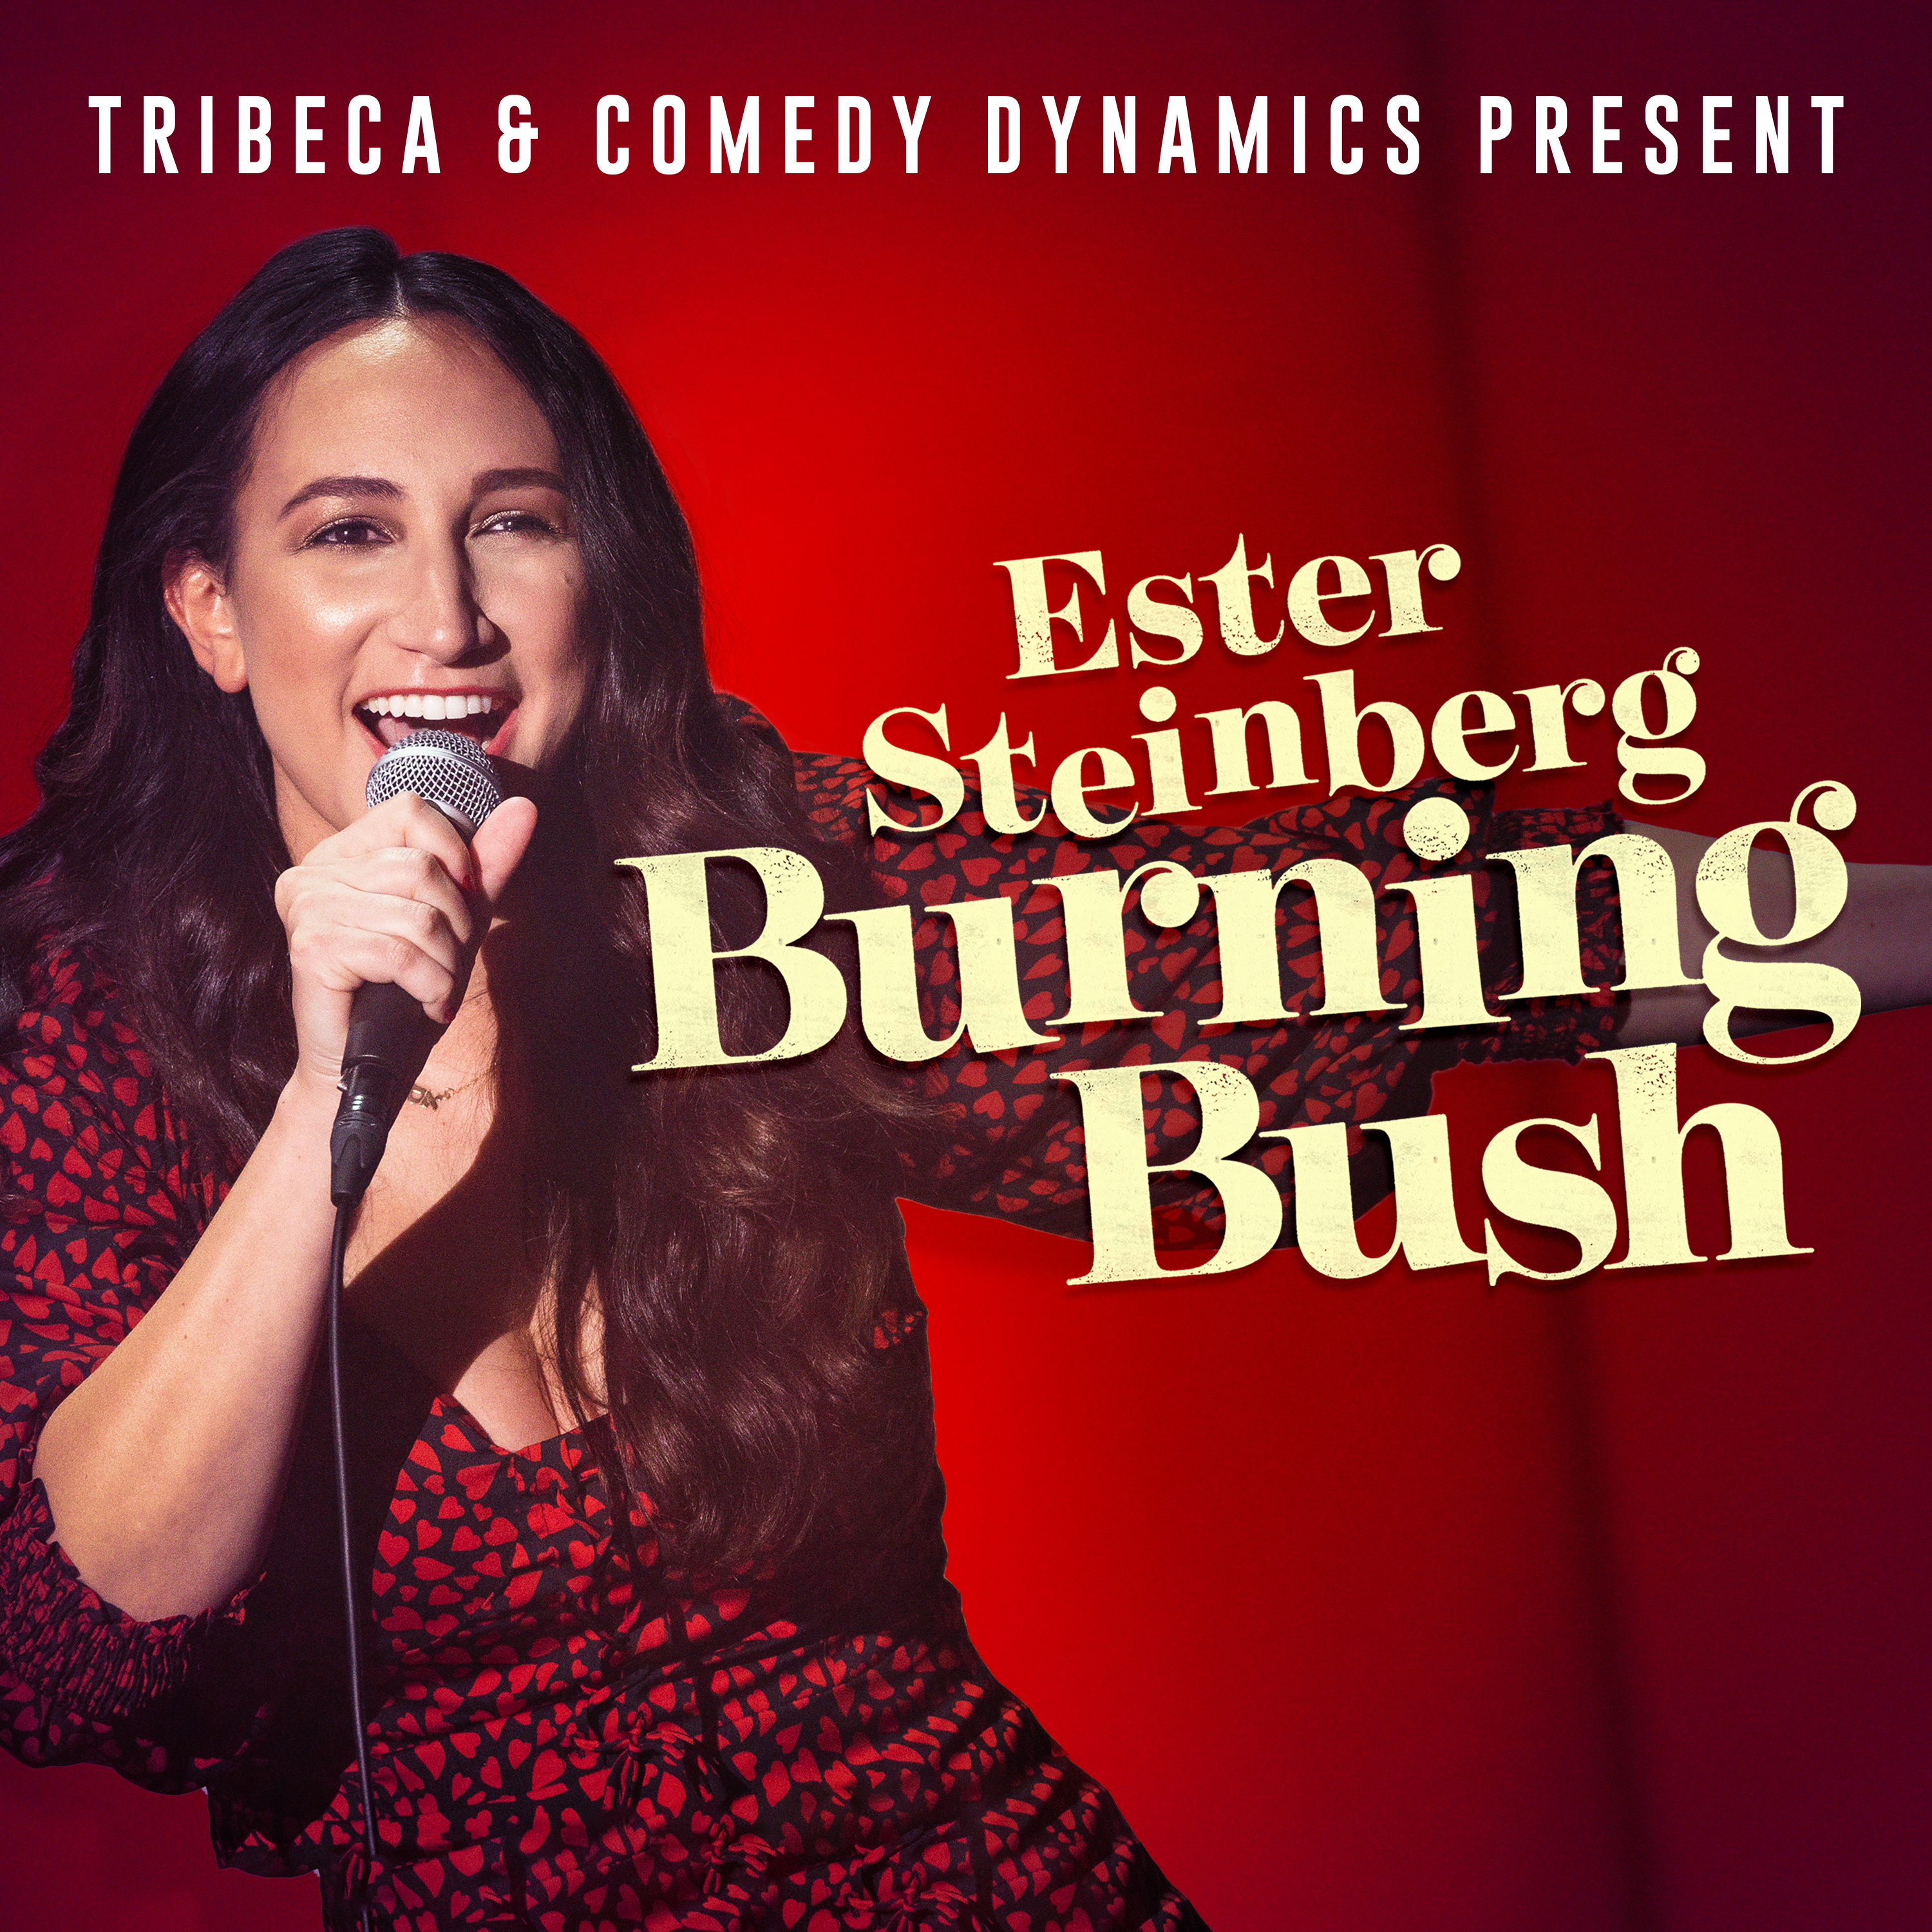 Comedian Ester Steinberg is having a moment and wants Plant Highs attention